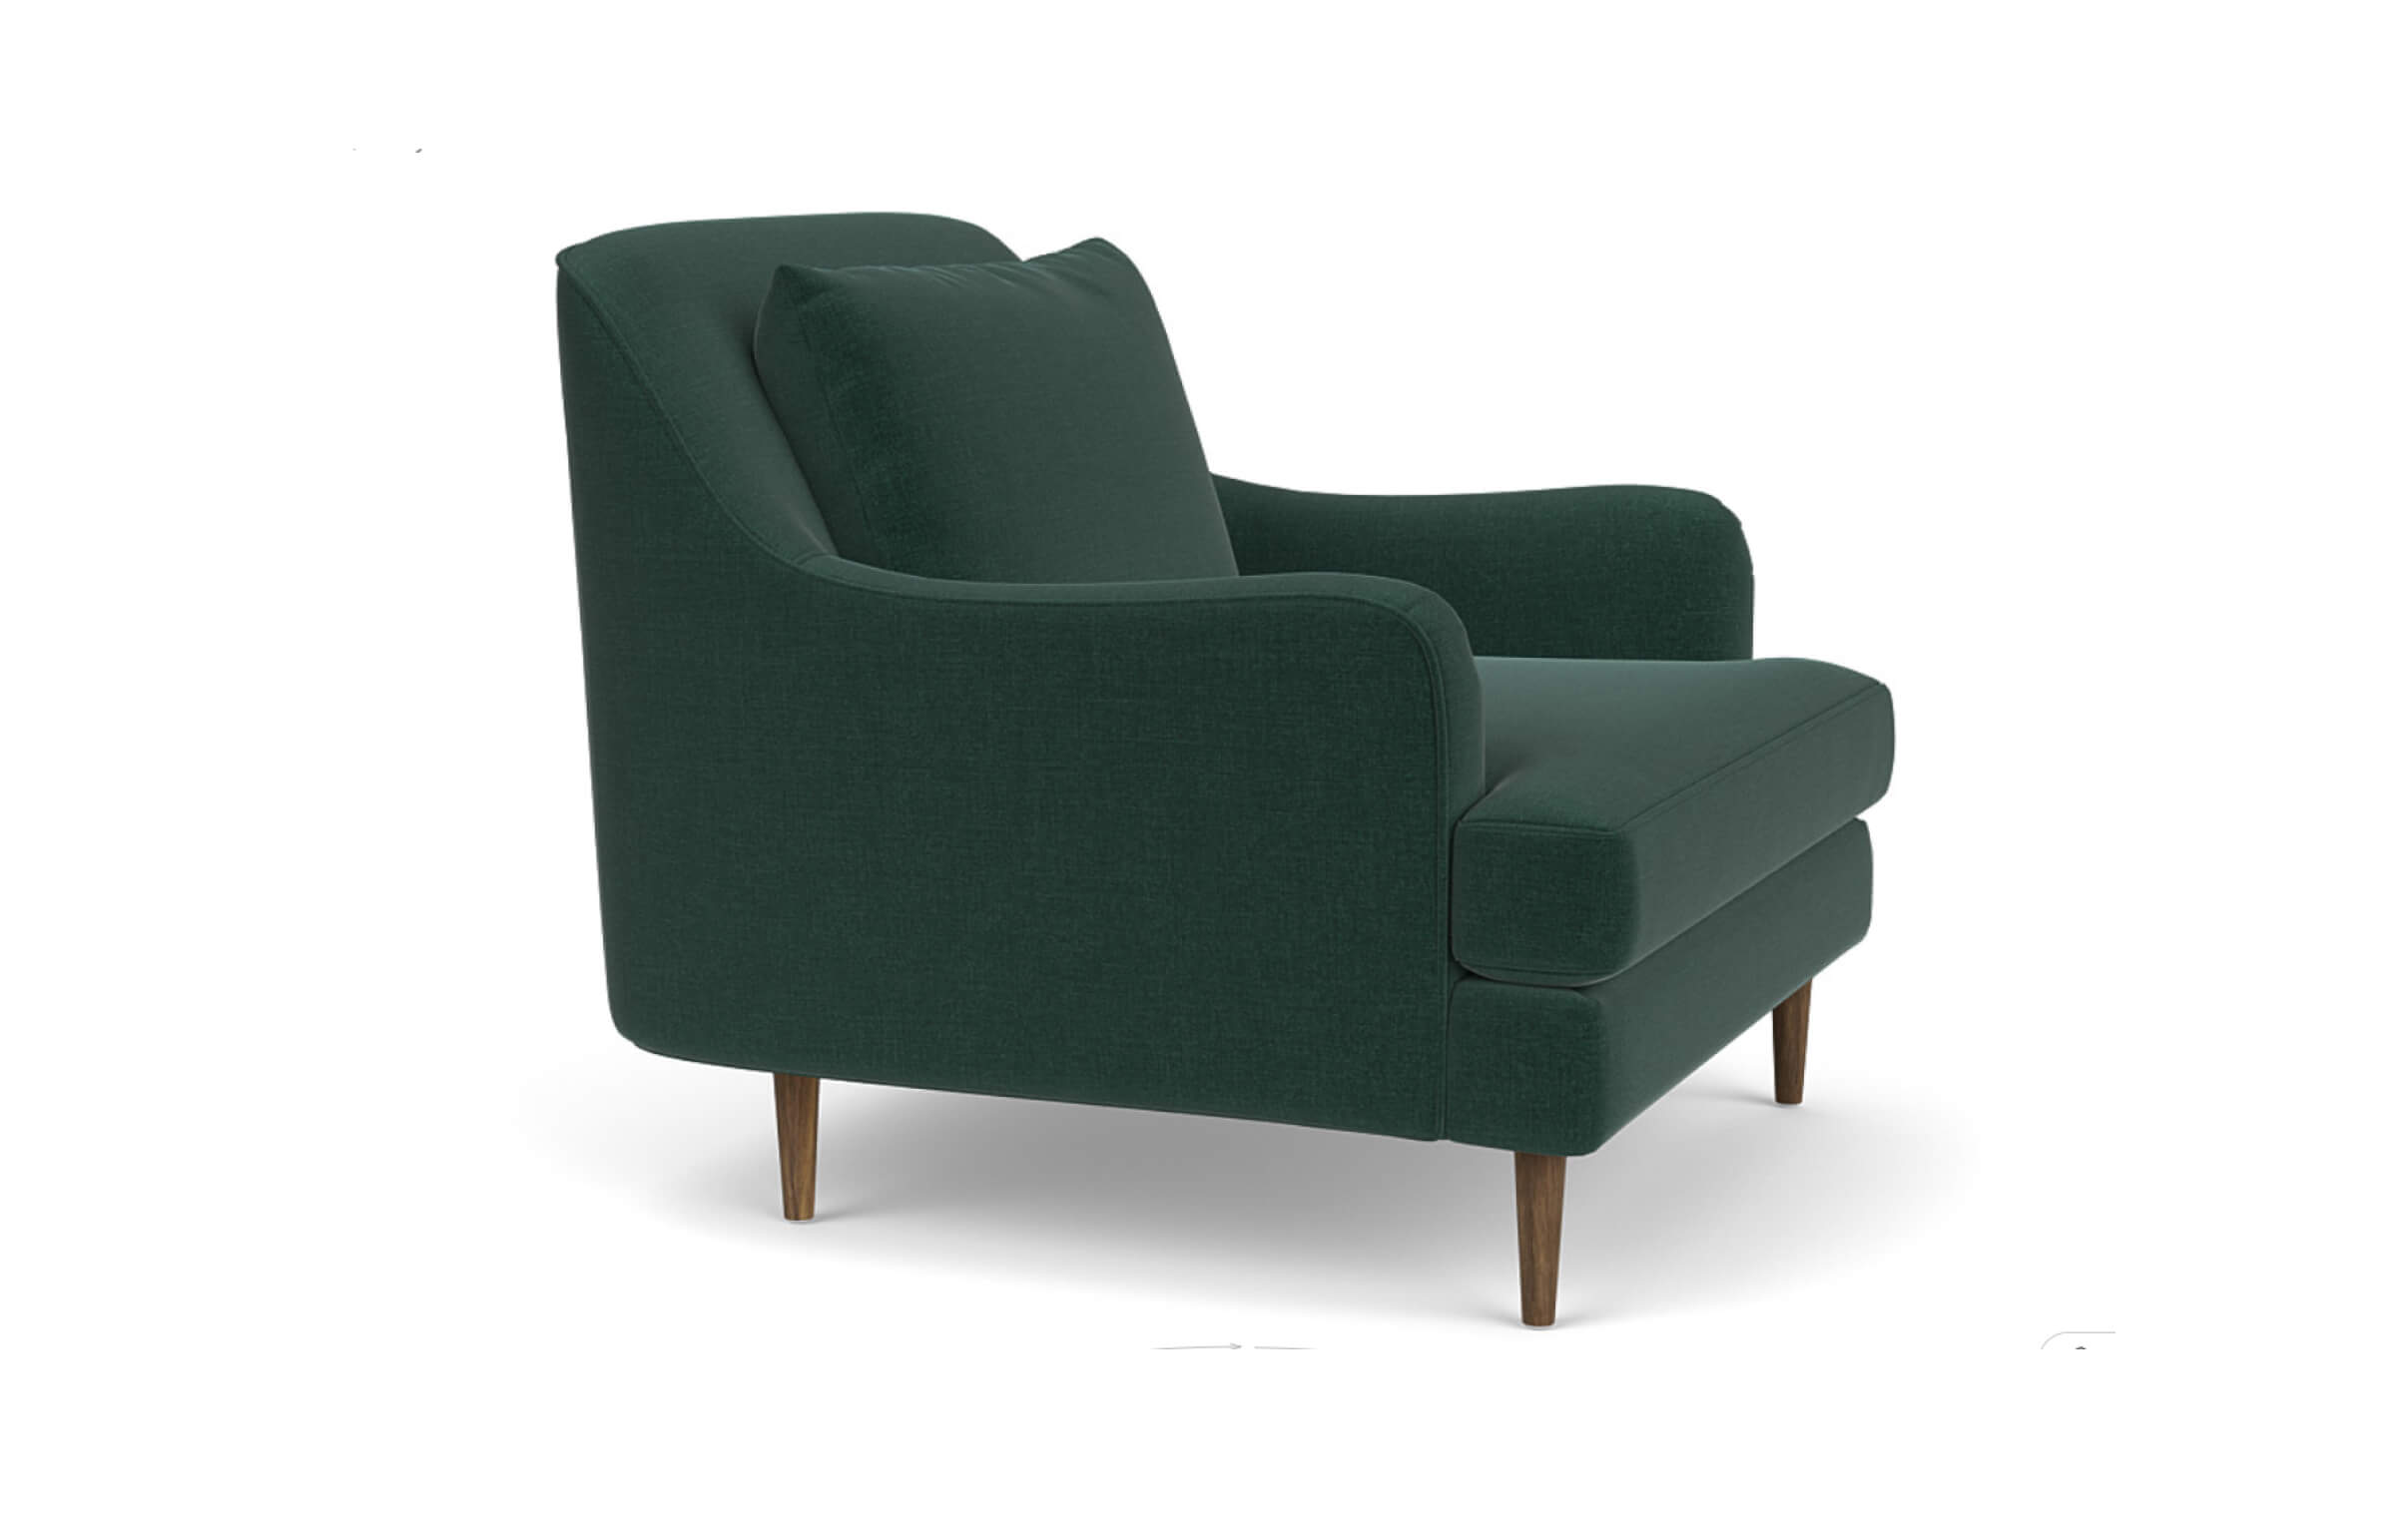 G: Kaydan Chair in Deluxe Peacock fabric